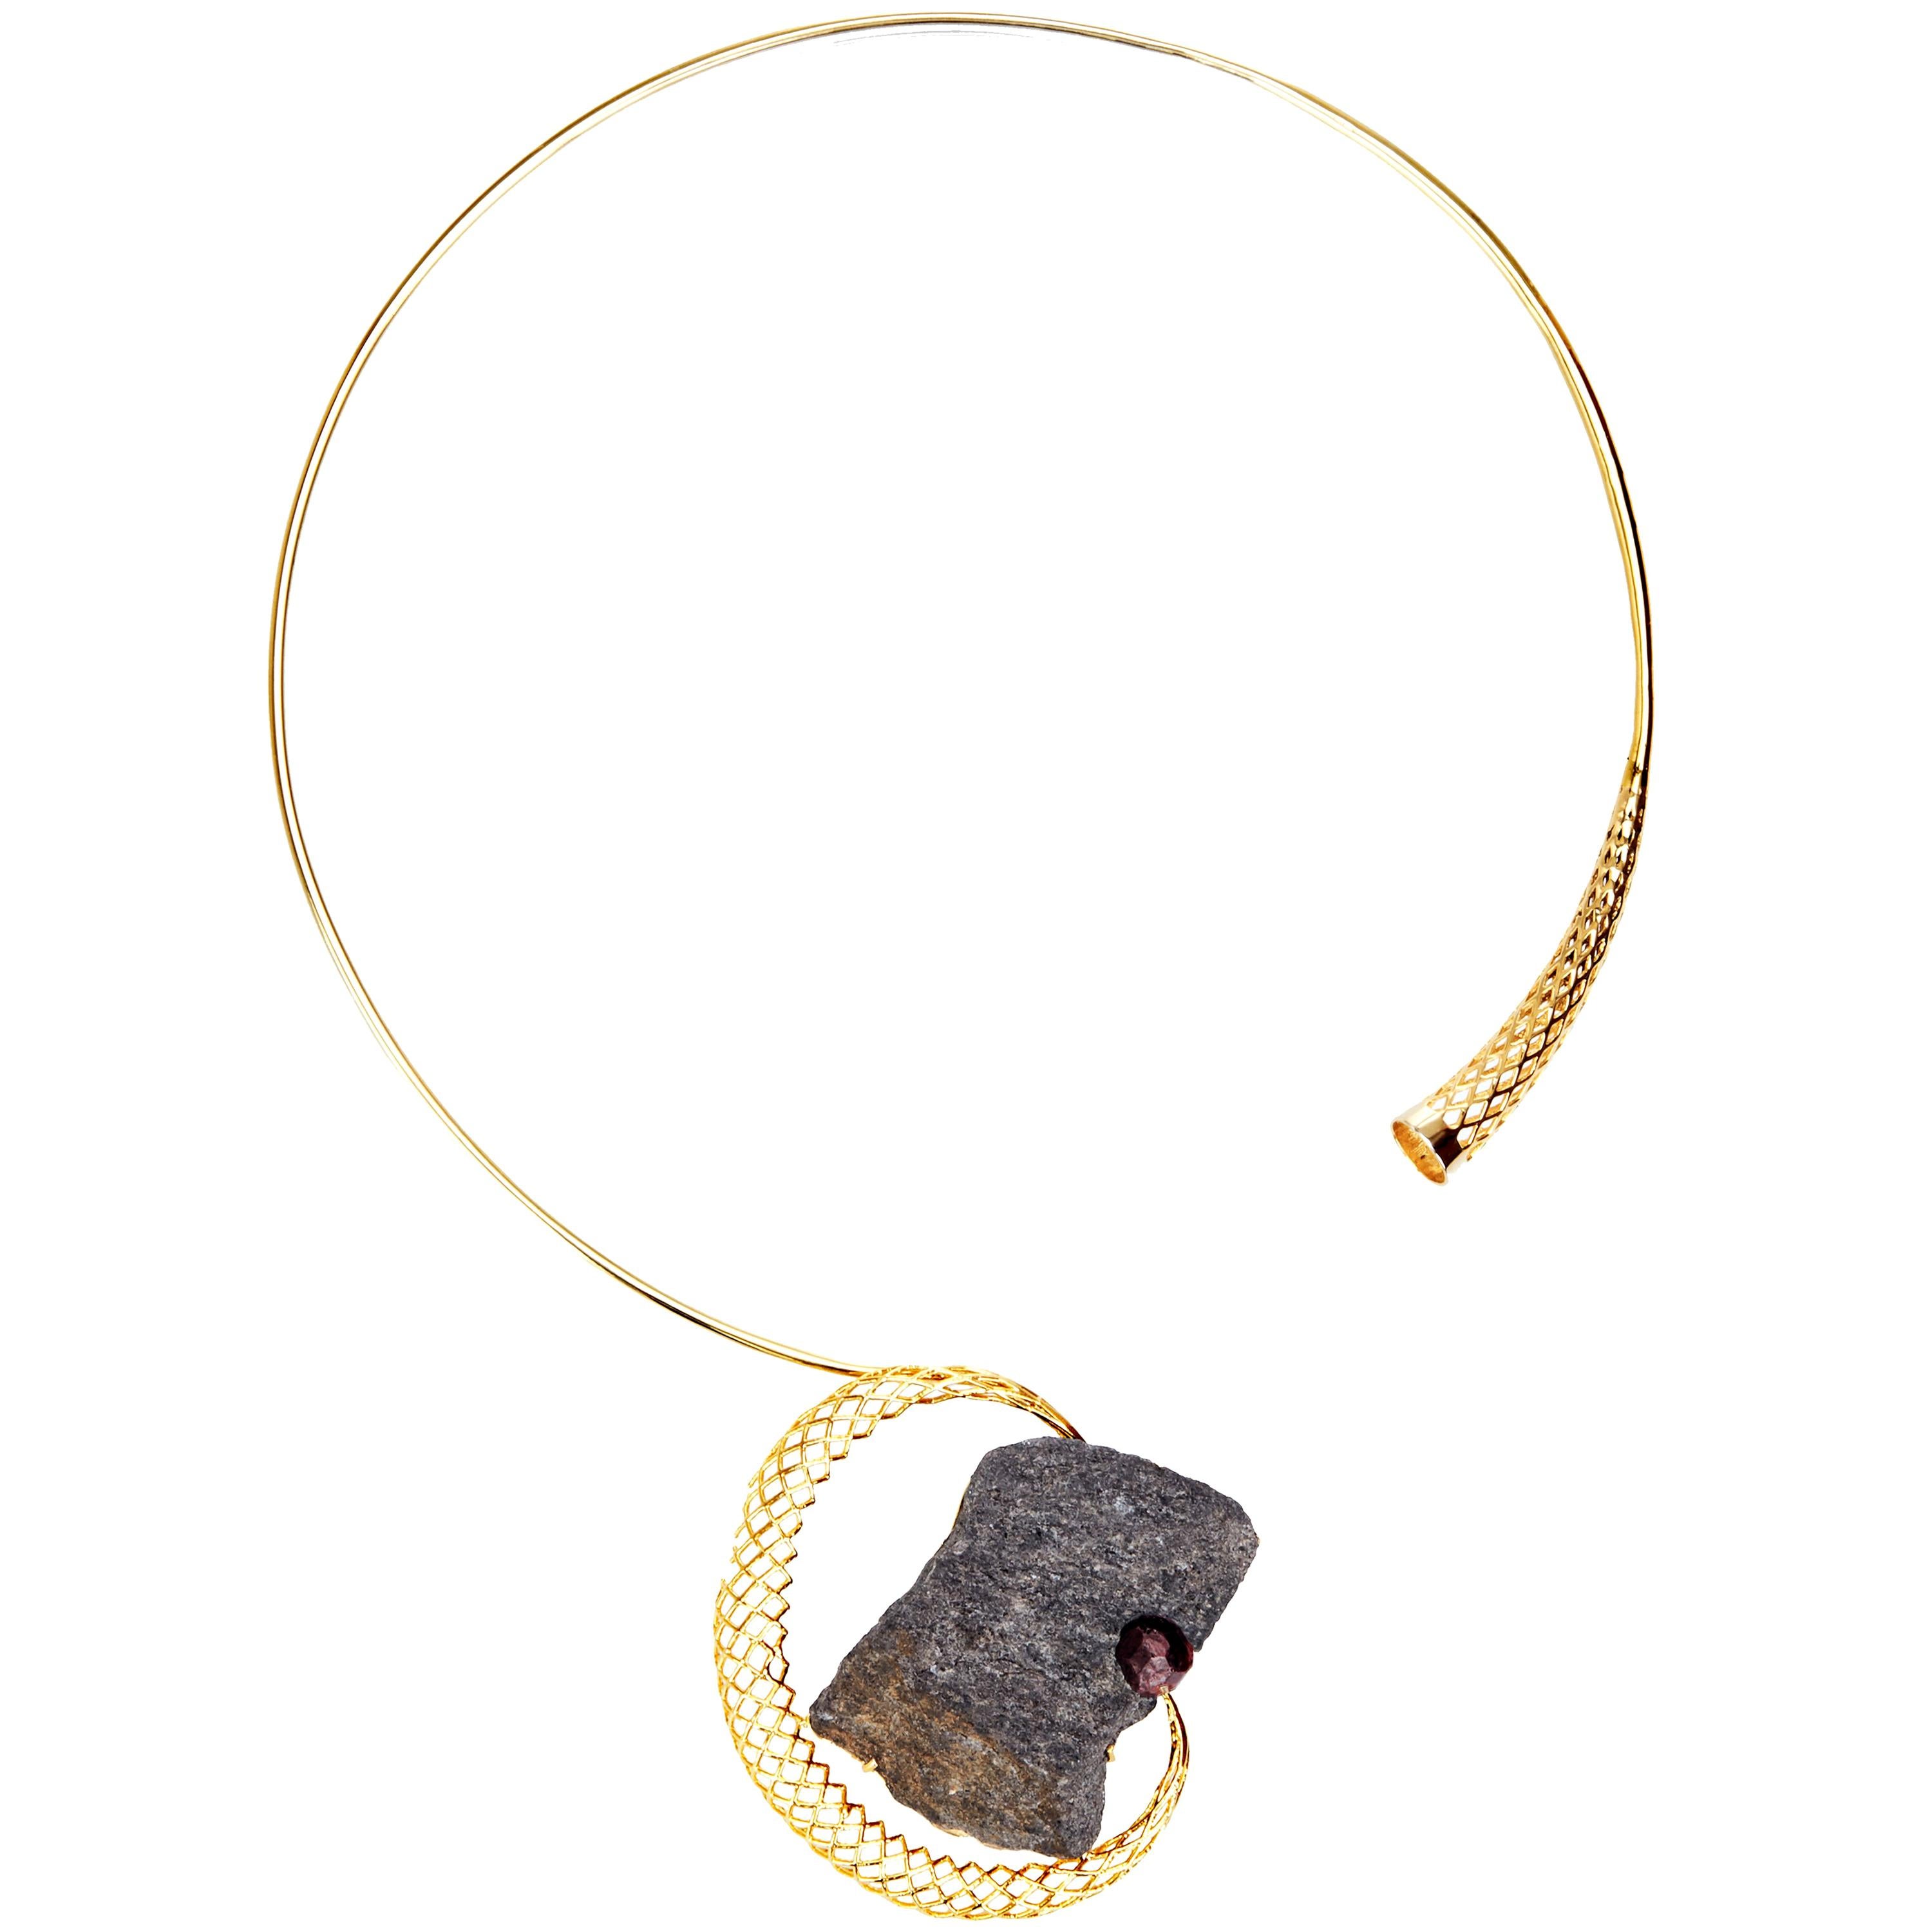 Yemyungji Mineral Collection Almandite Garnet 18 K Gold Great Impact Necklace For Sale